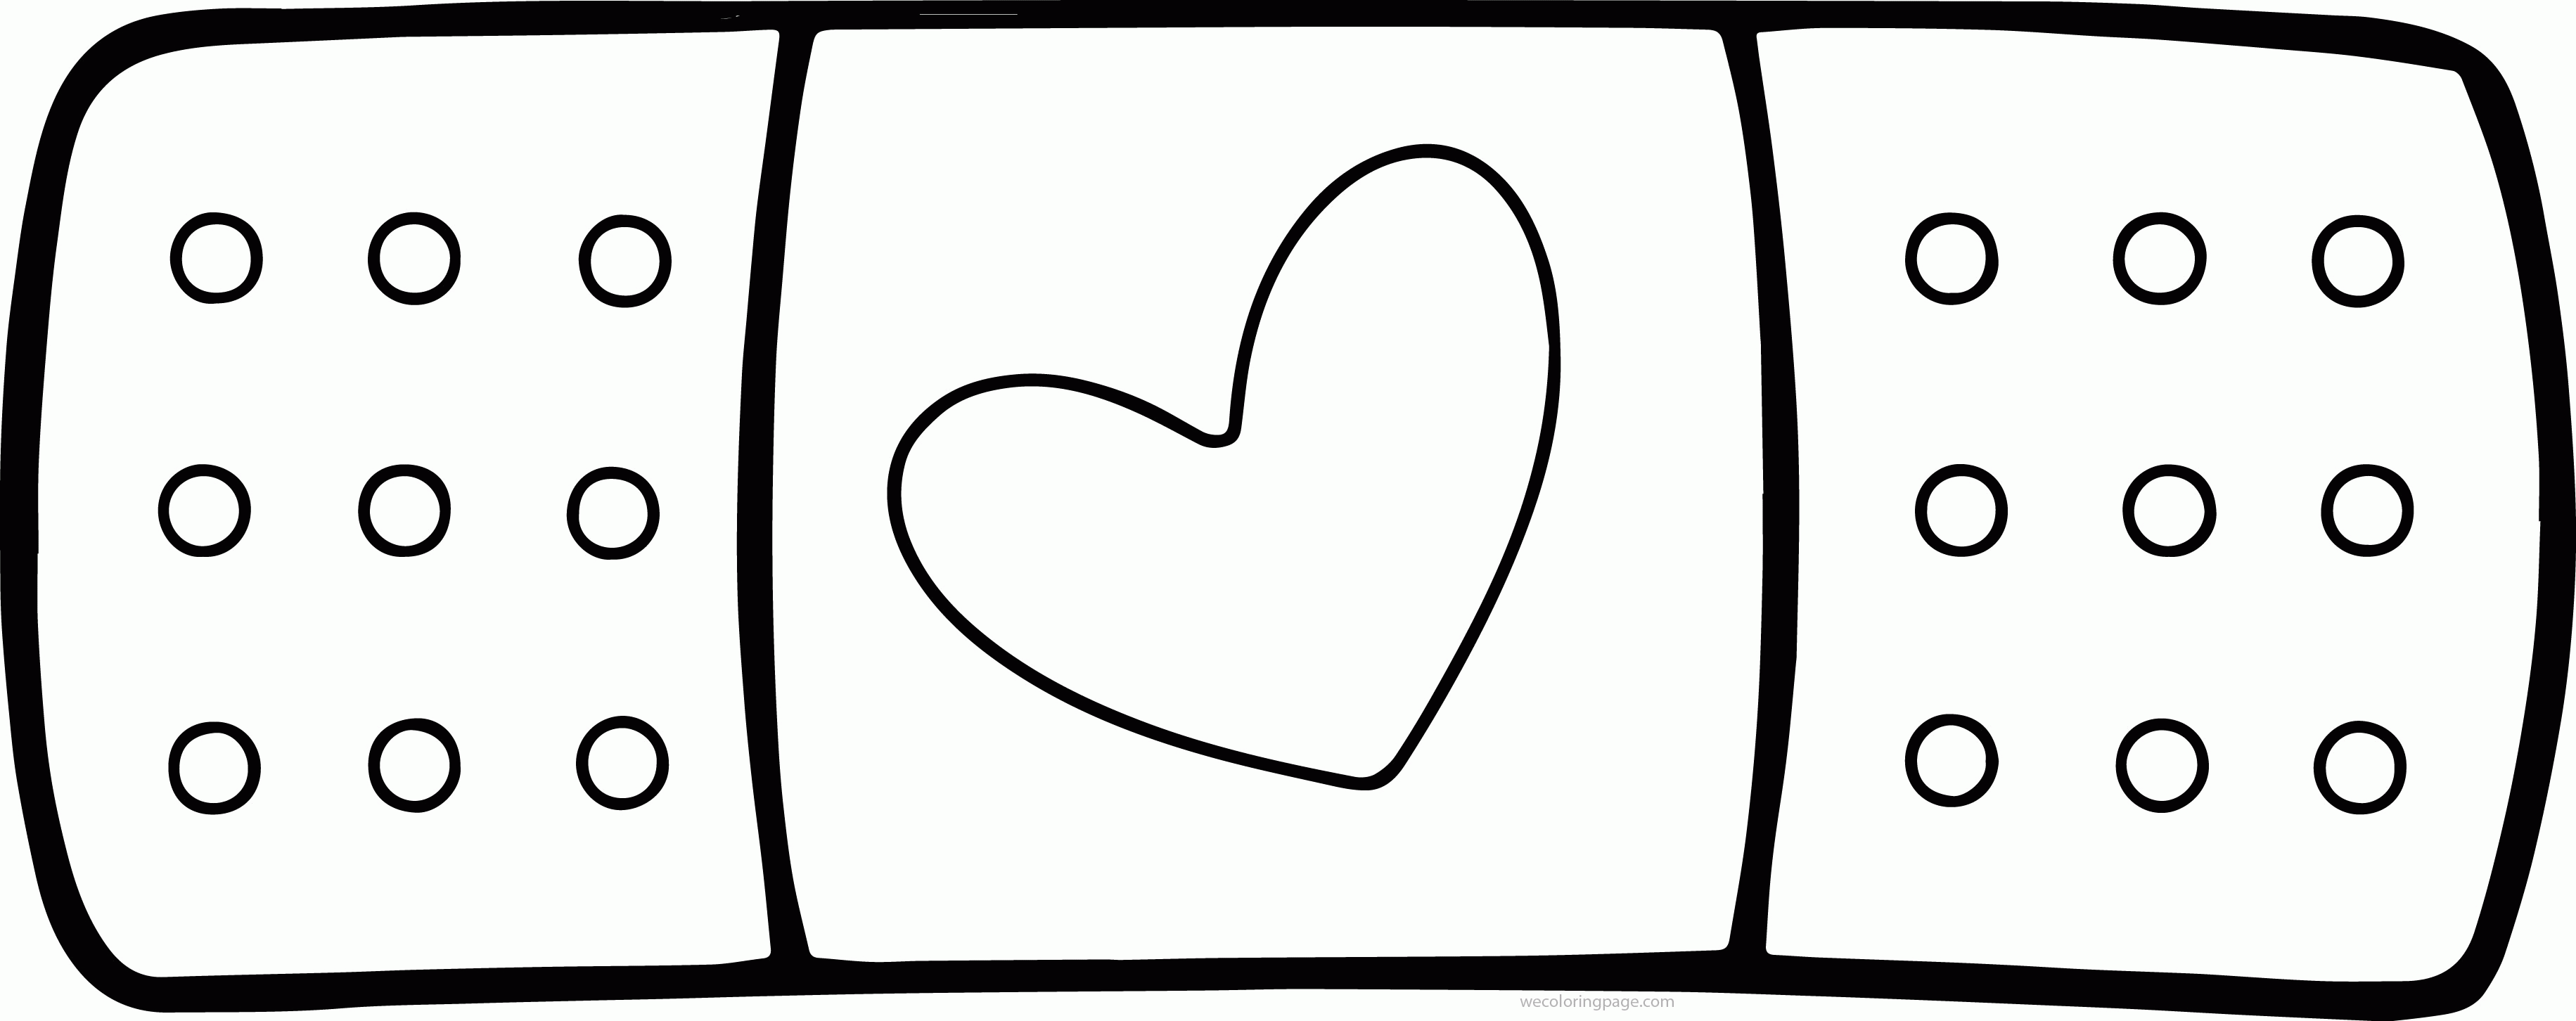 Free Band Aid Coloring Page Download Free Band Aid Coloring Page png